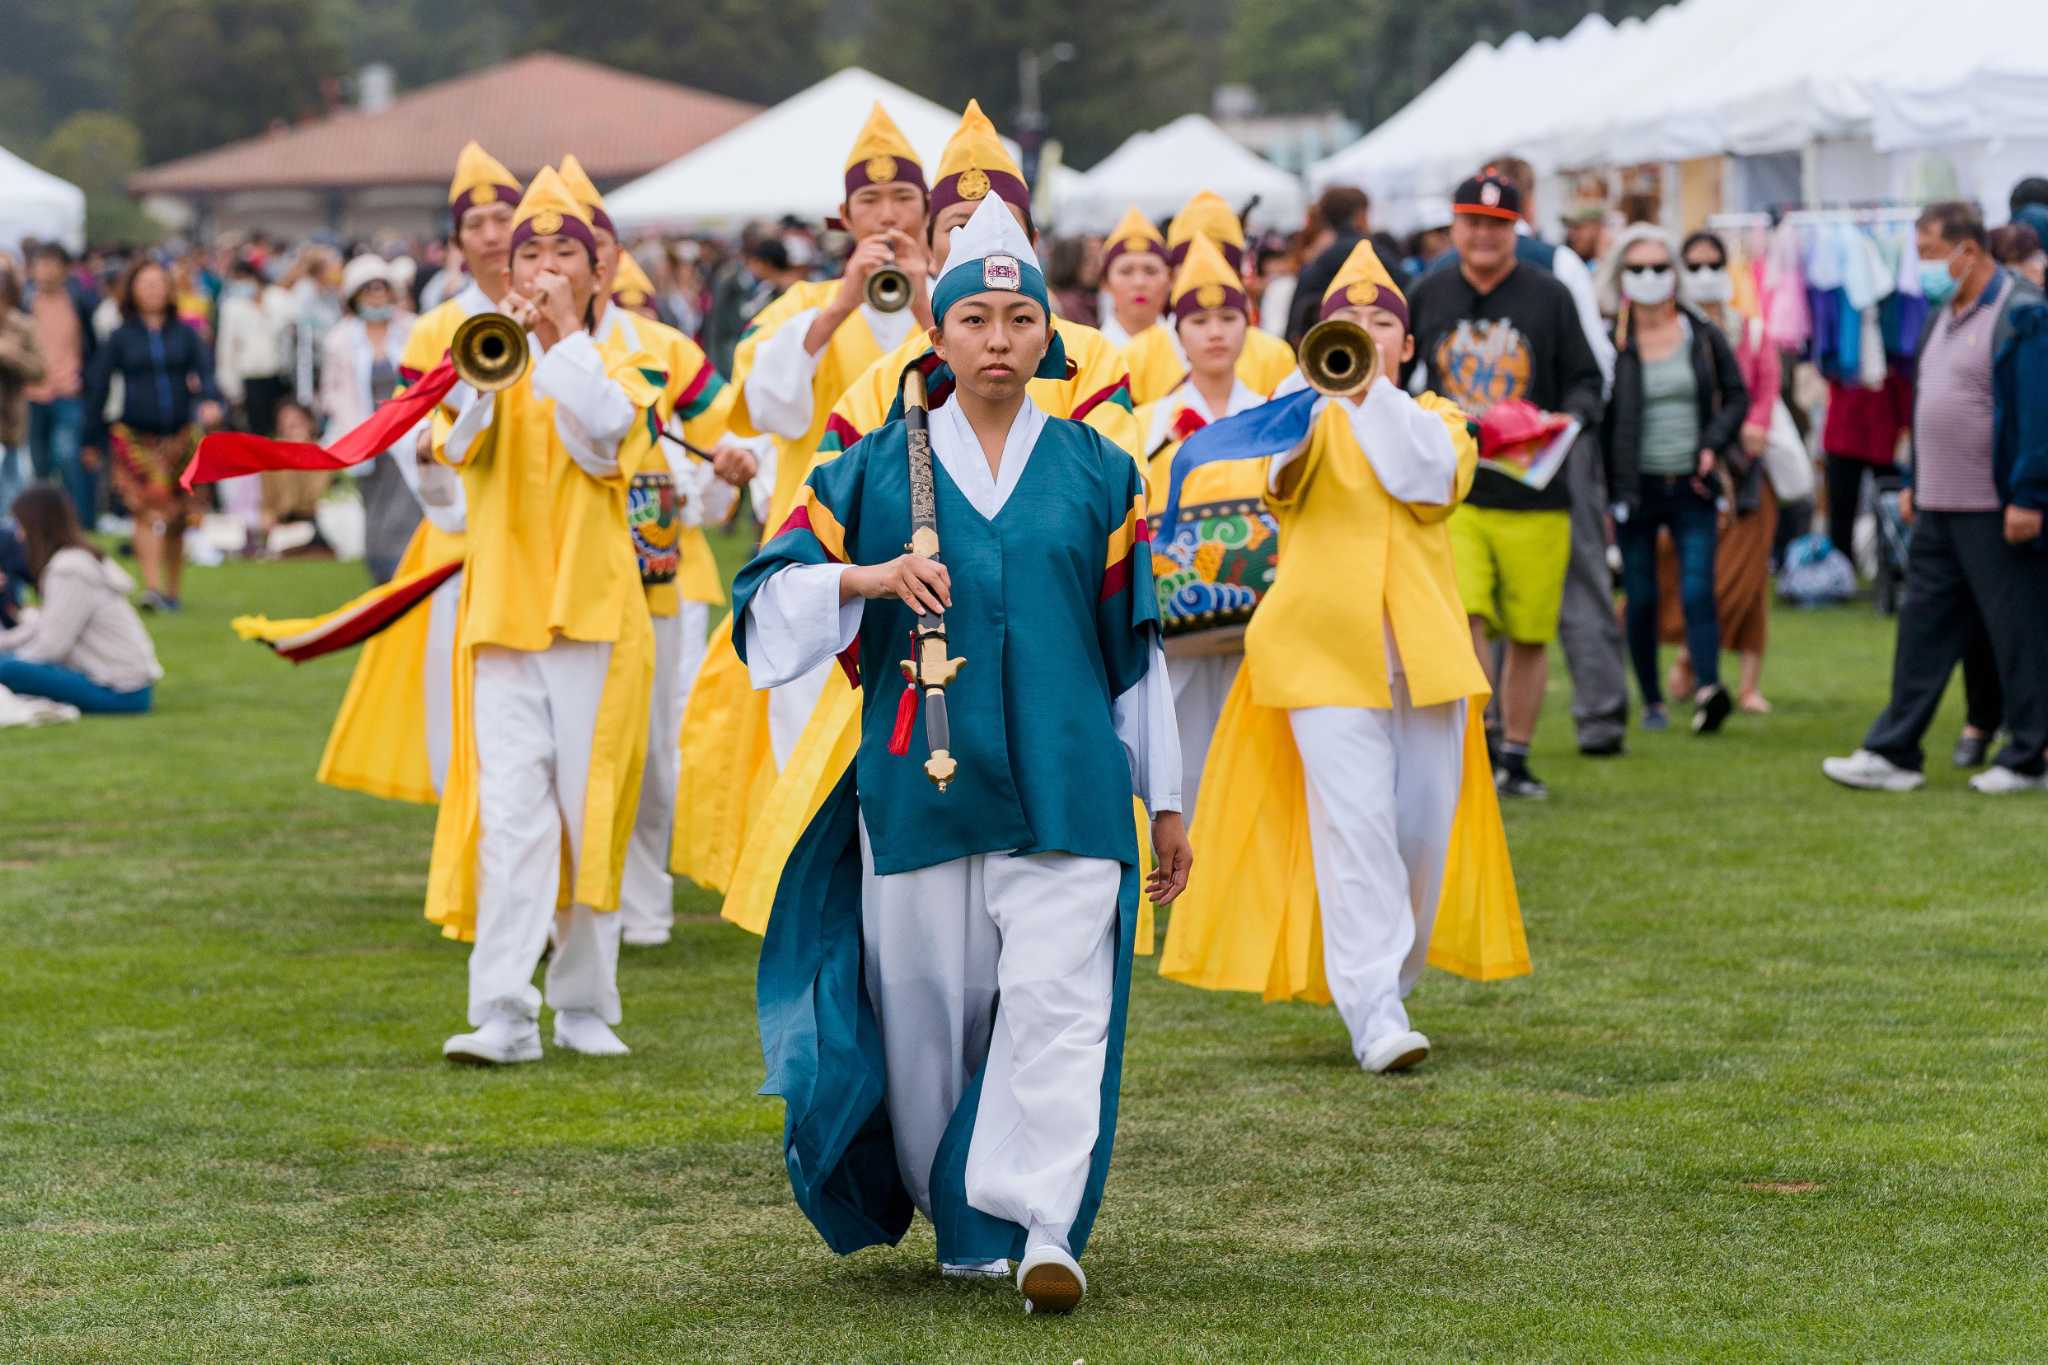 Thousands gather for Korean food and culture at mid-autumn moon festival